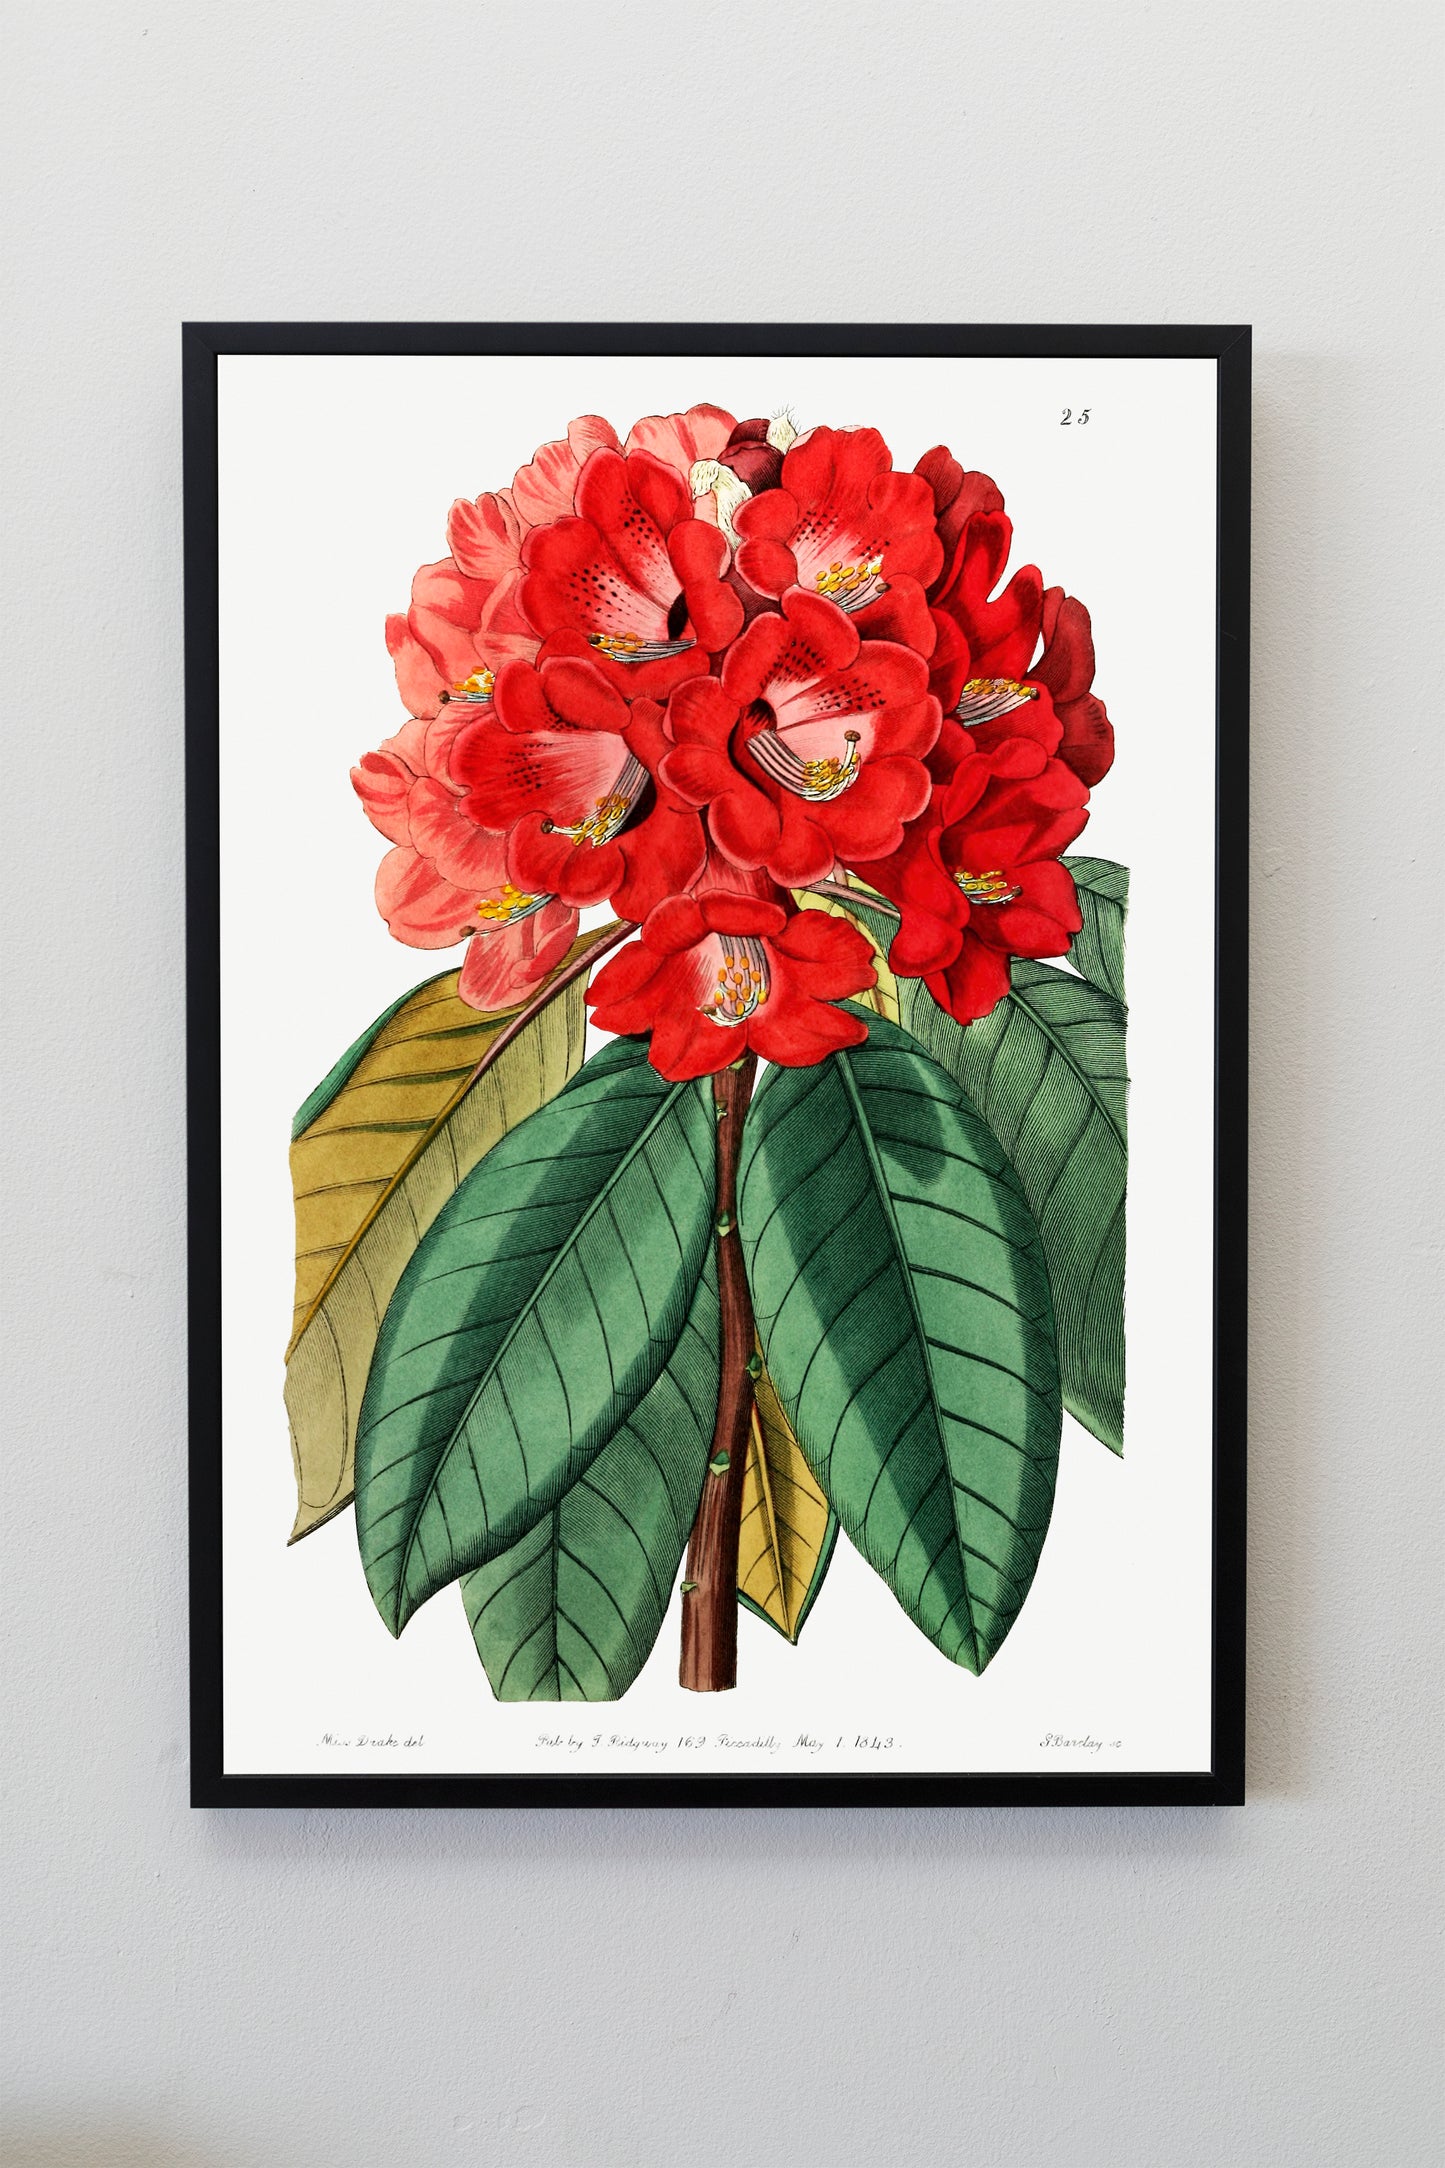 Rhododendron Rollissonii Plant Illustration Poster Print Wall Hanging Decor A4 A3 A2